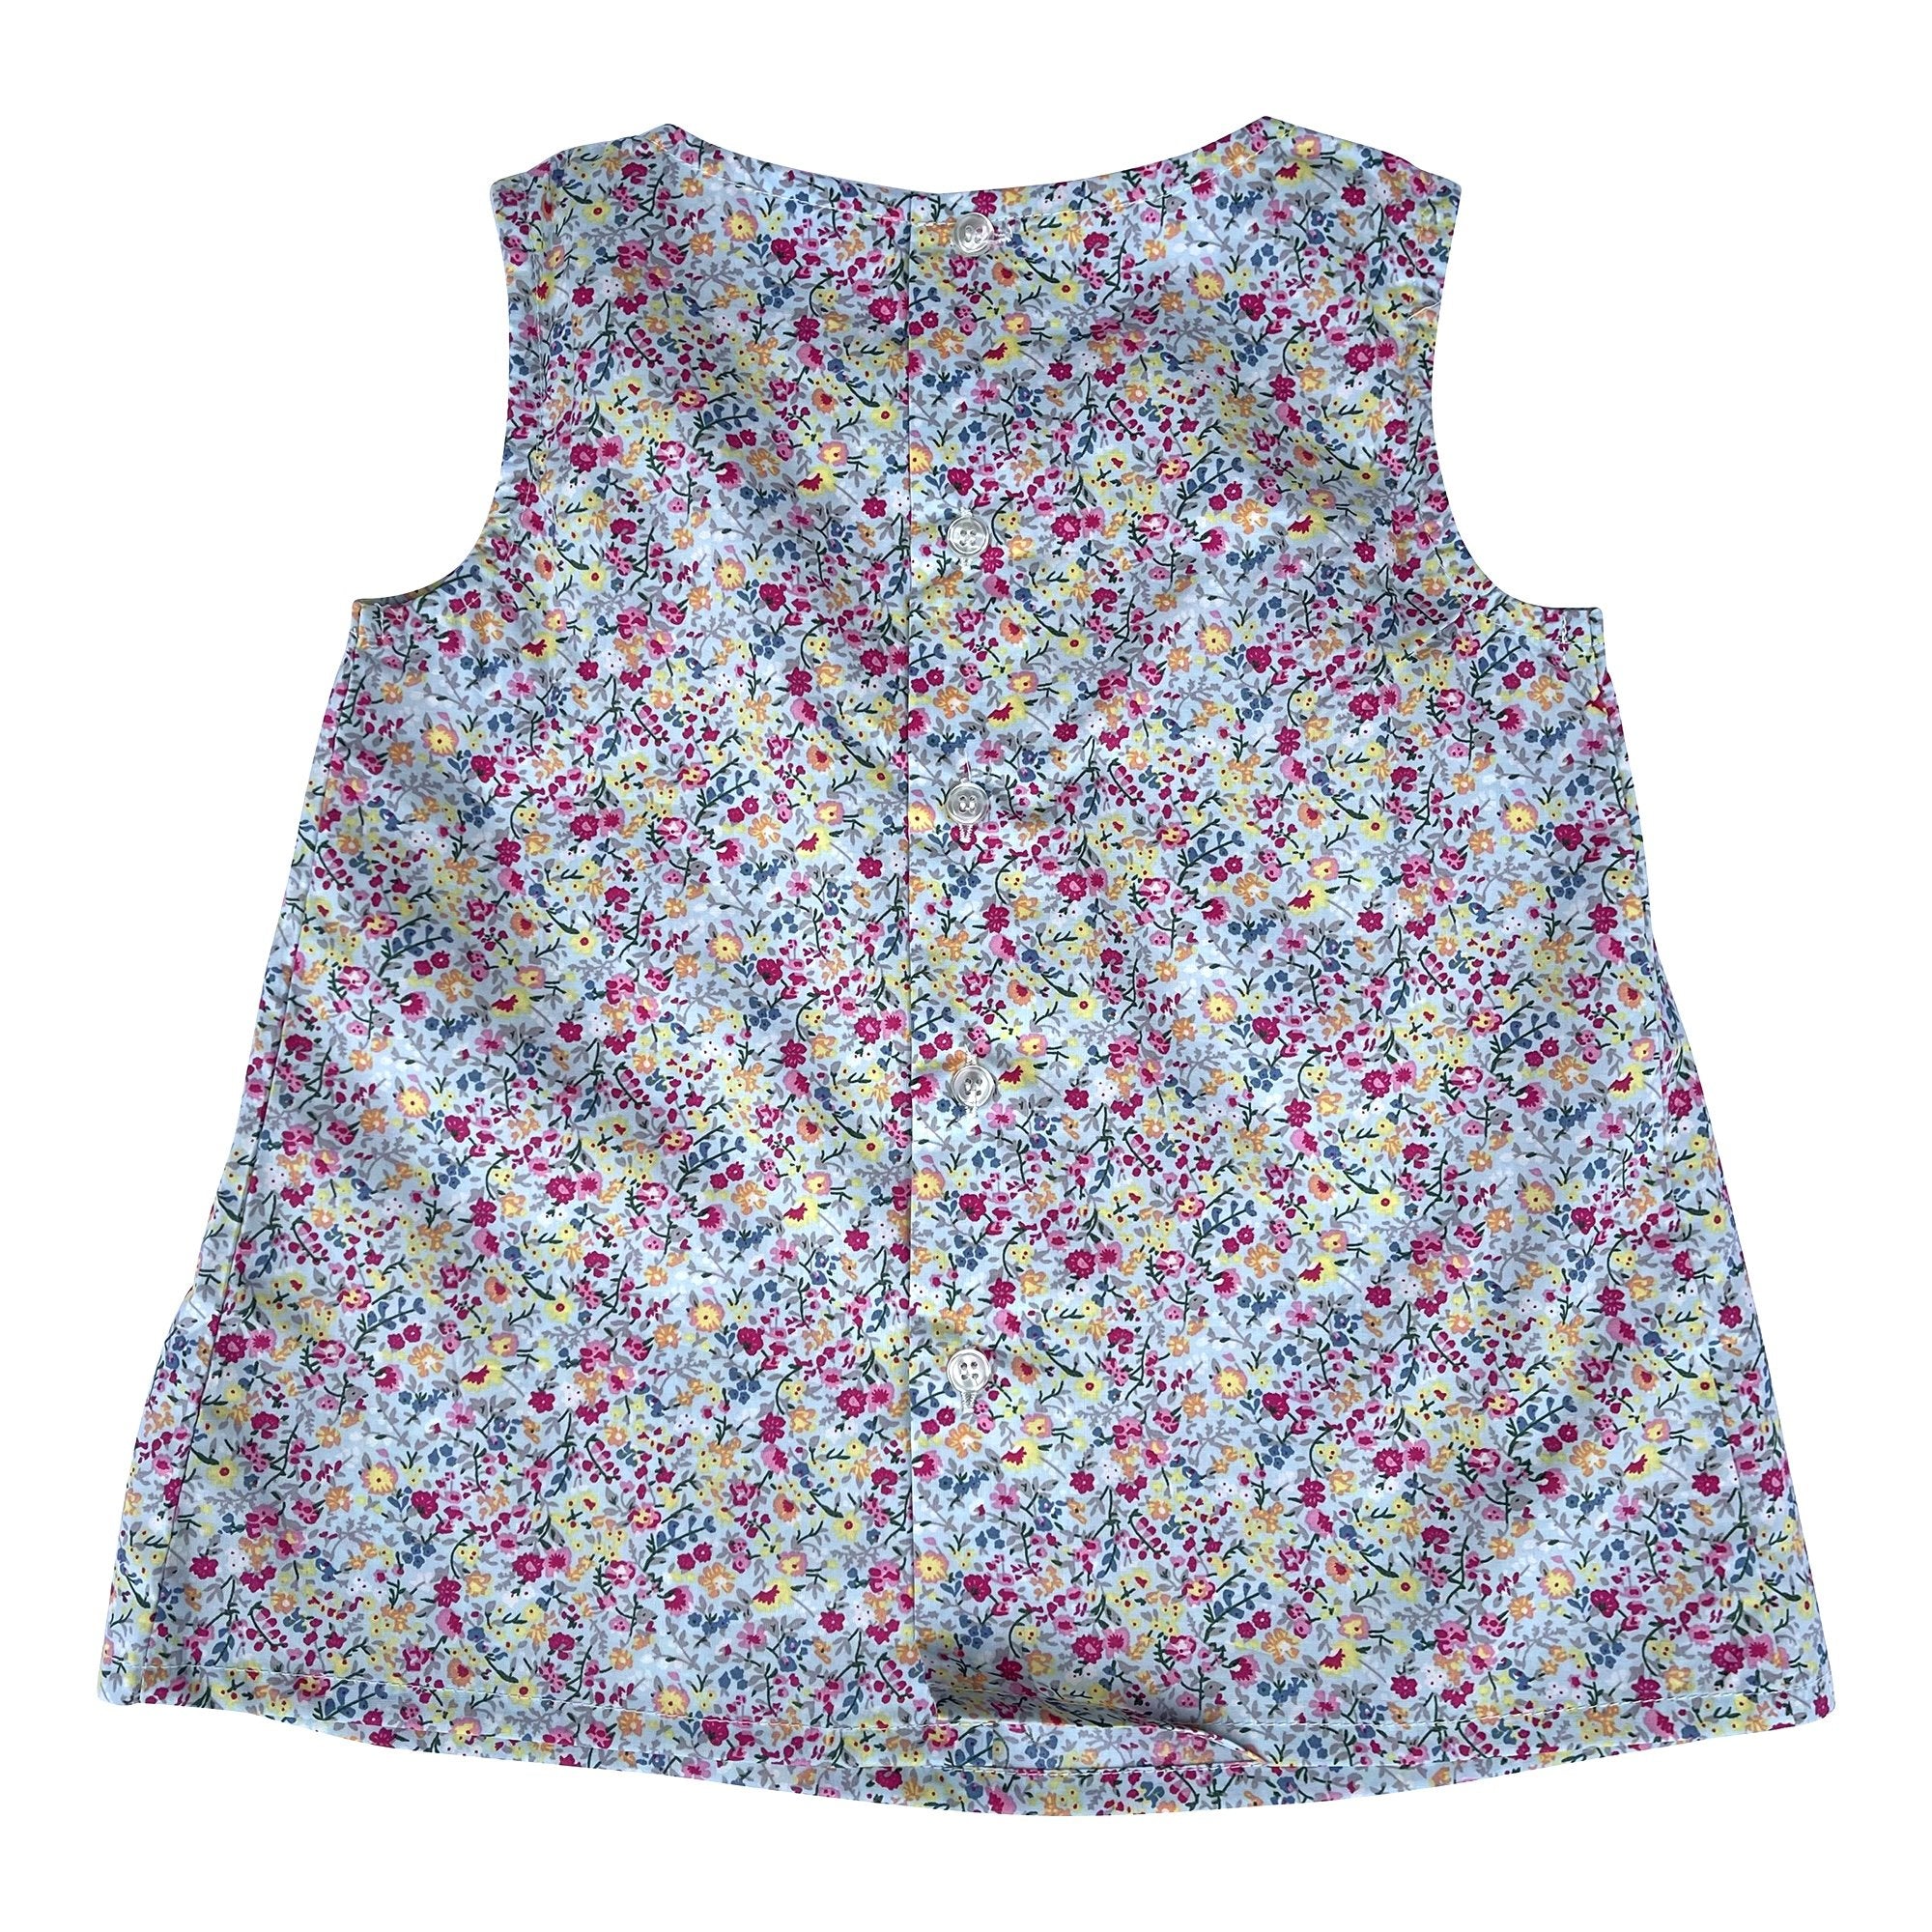 Florrie Tunic Top In Blue Floral - Cou Cou Baby